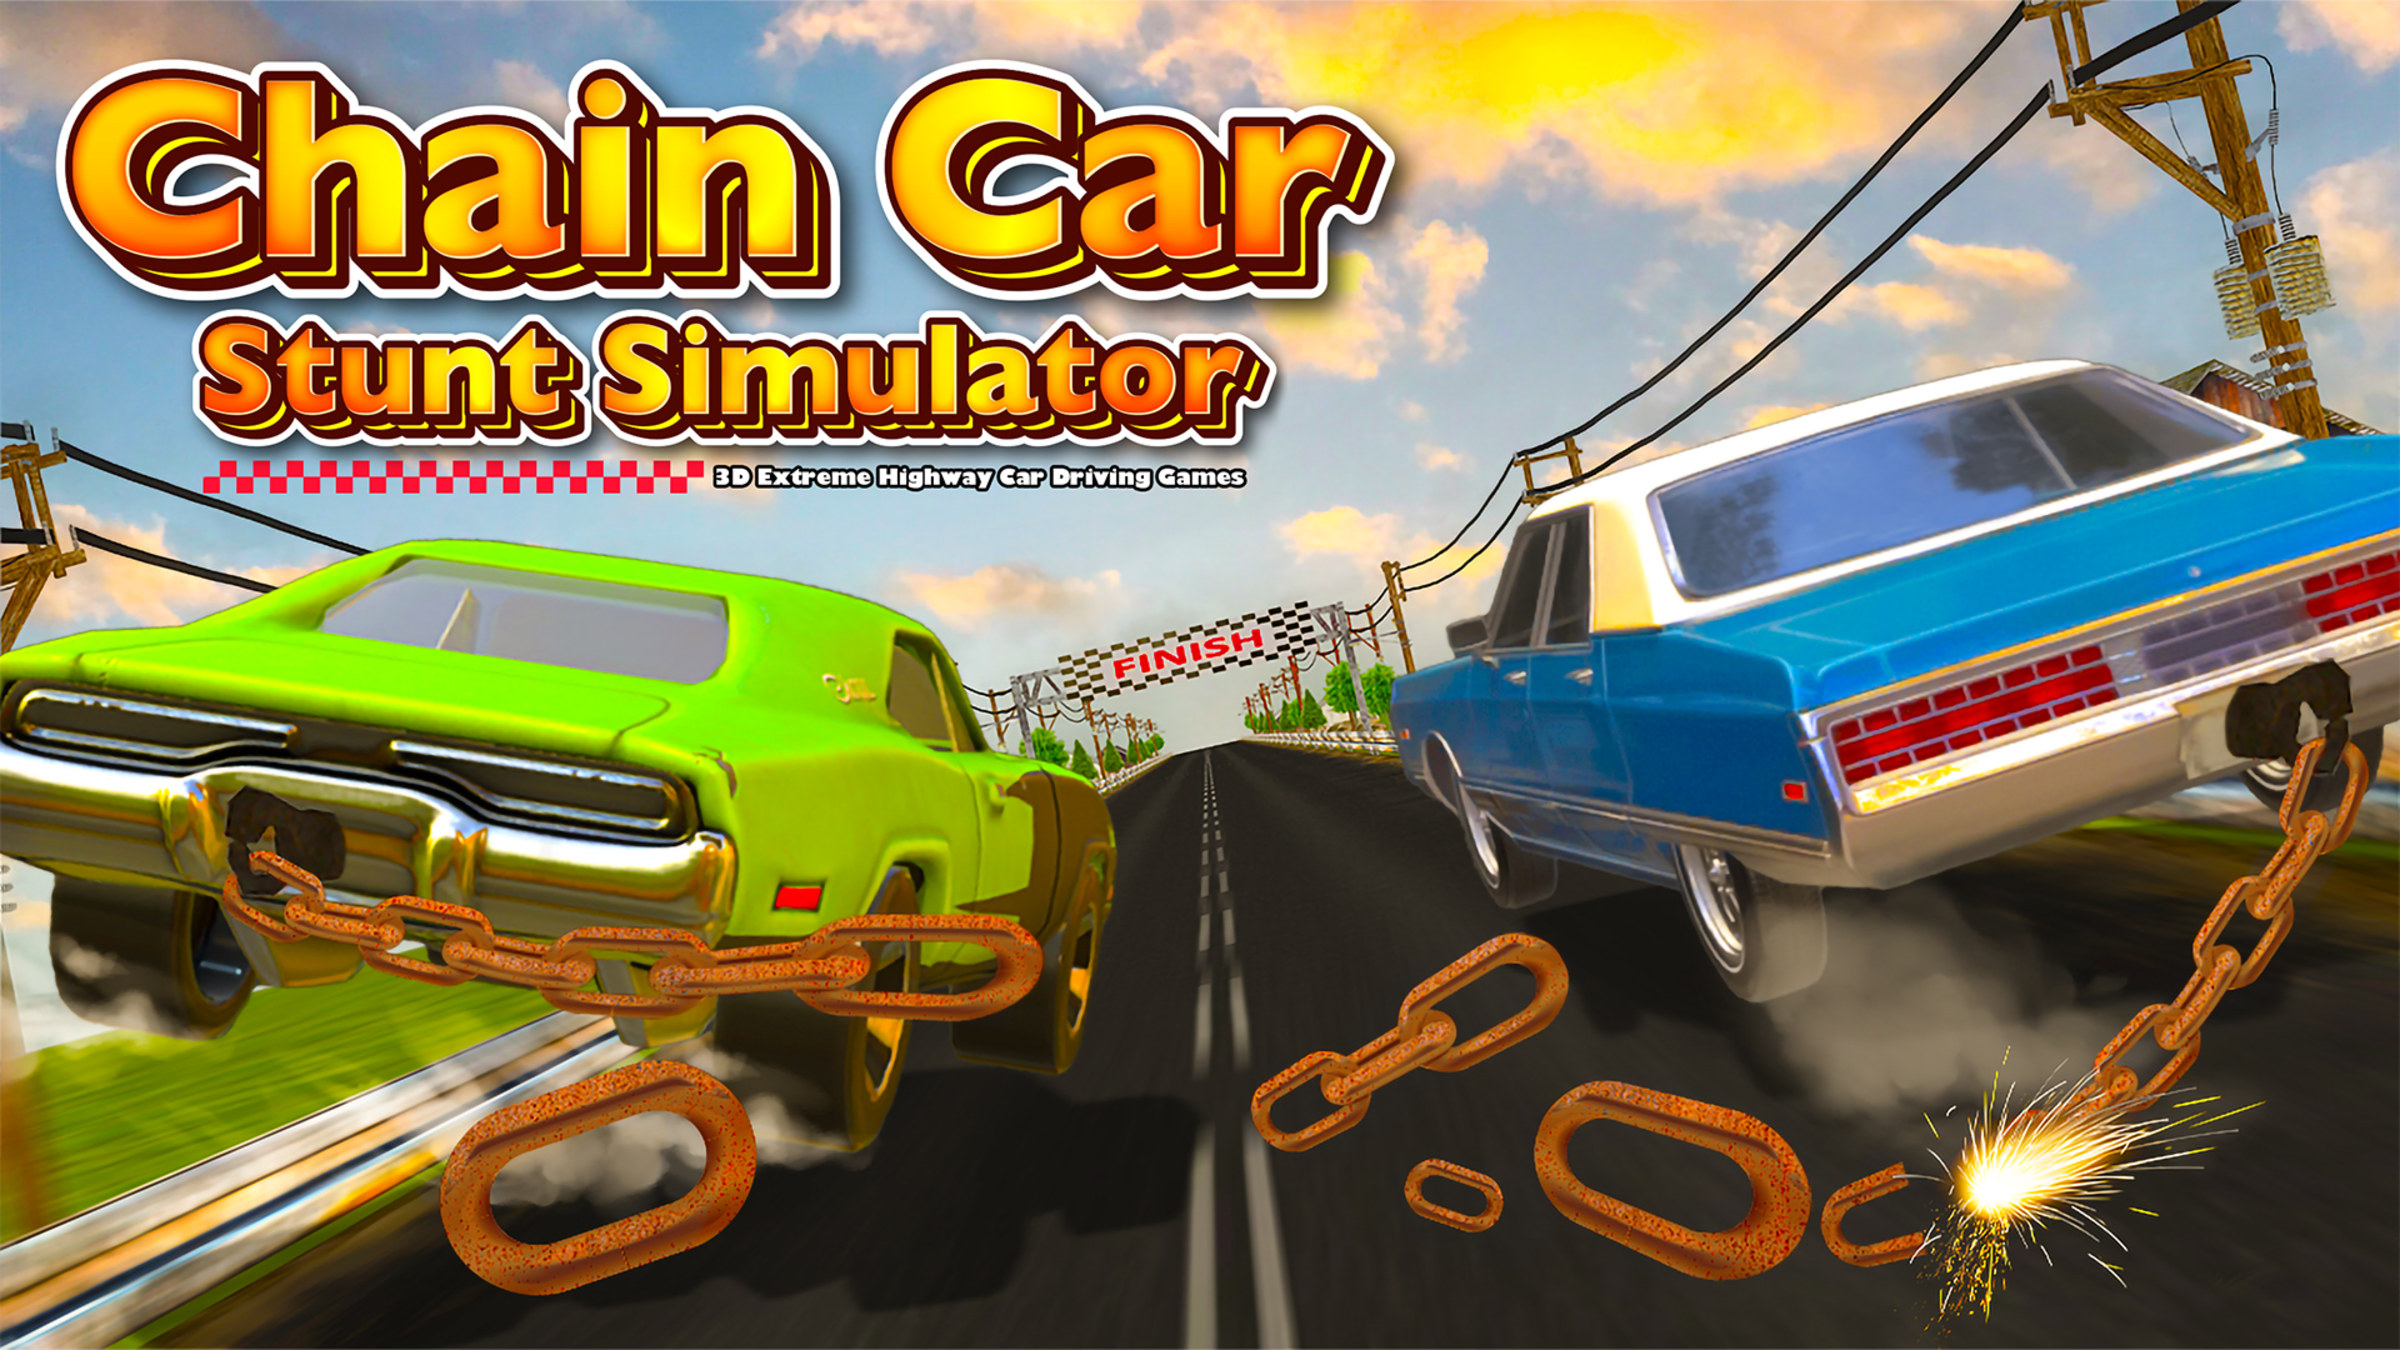 https://assets.nintendo.com/image/upload/c_fill,w_1200/q_auto:best/f_auto/dpr_2.0/ncom/en_US/games/switch/c/chain-car-stunt-simulator-3d-extreme-highway-car-driving-games-switch/